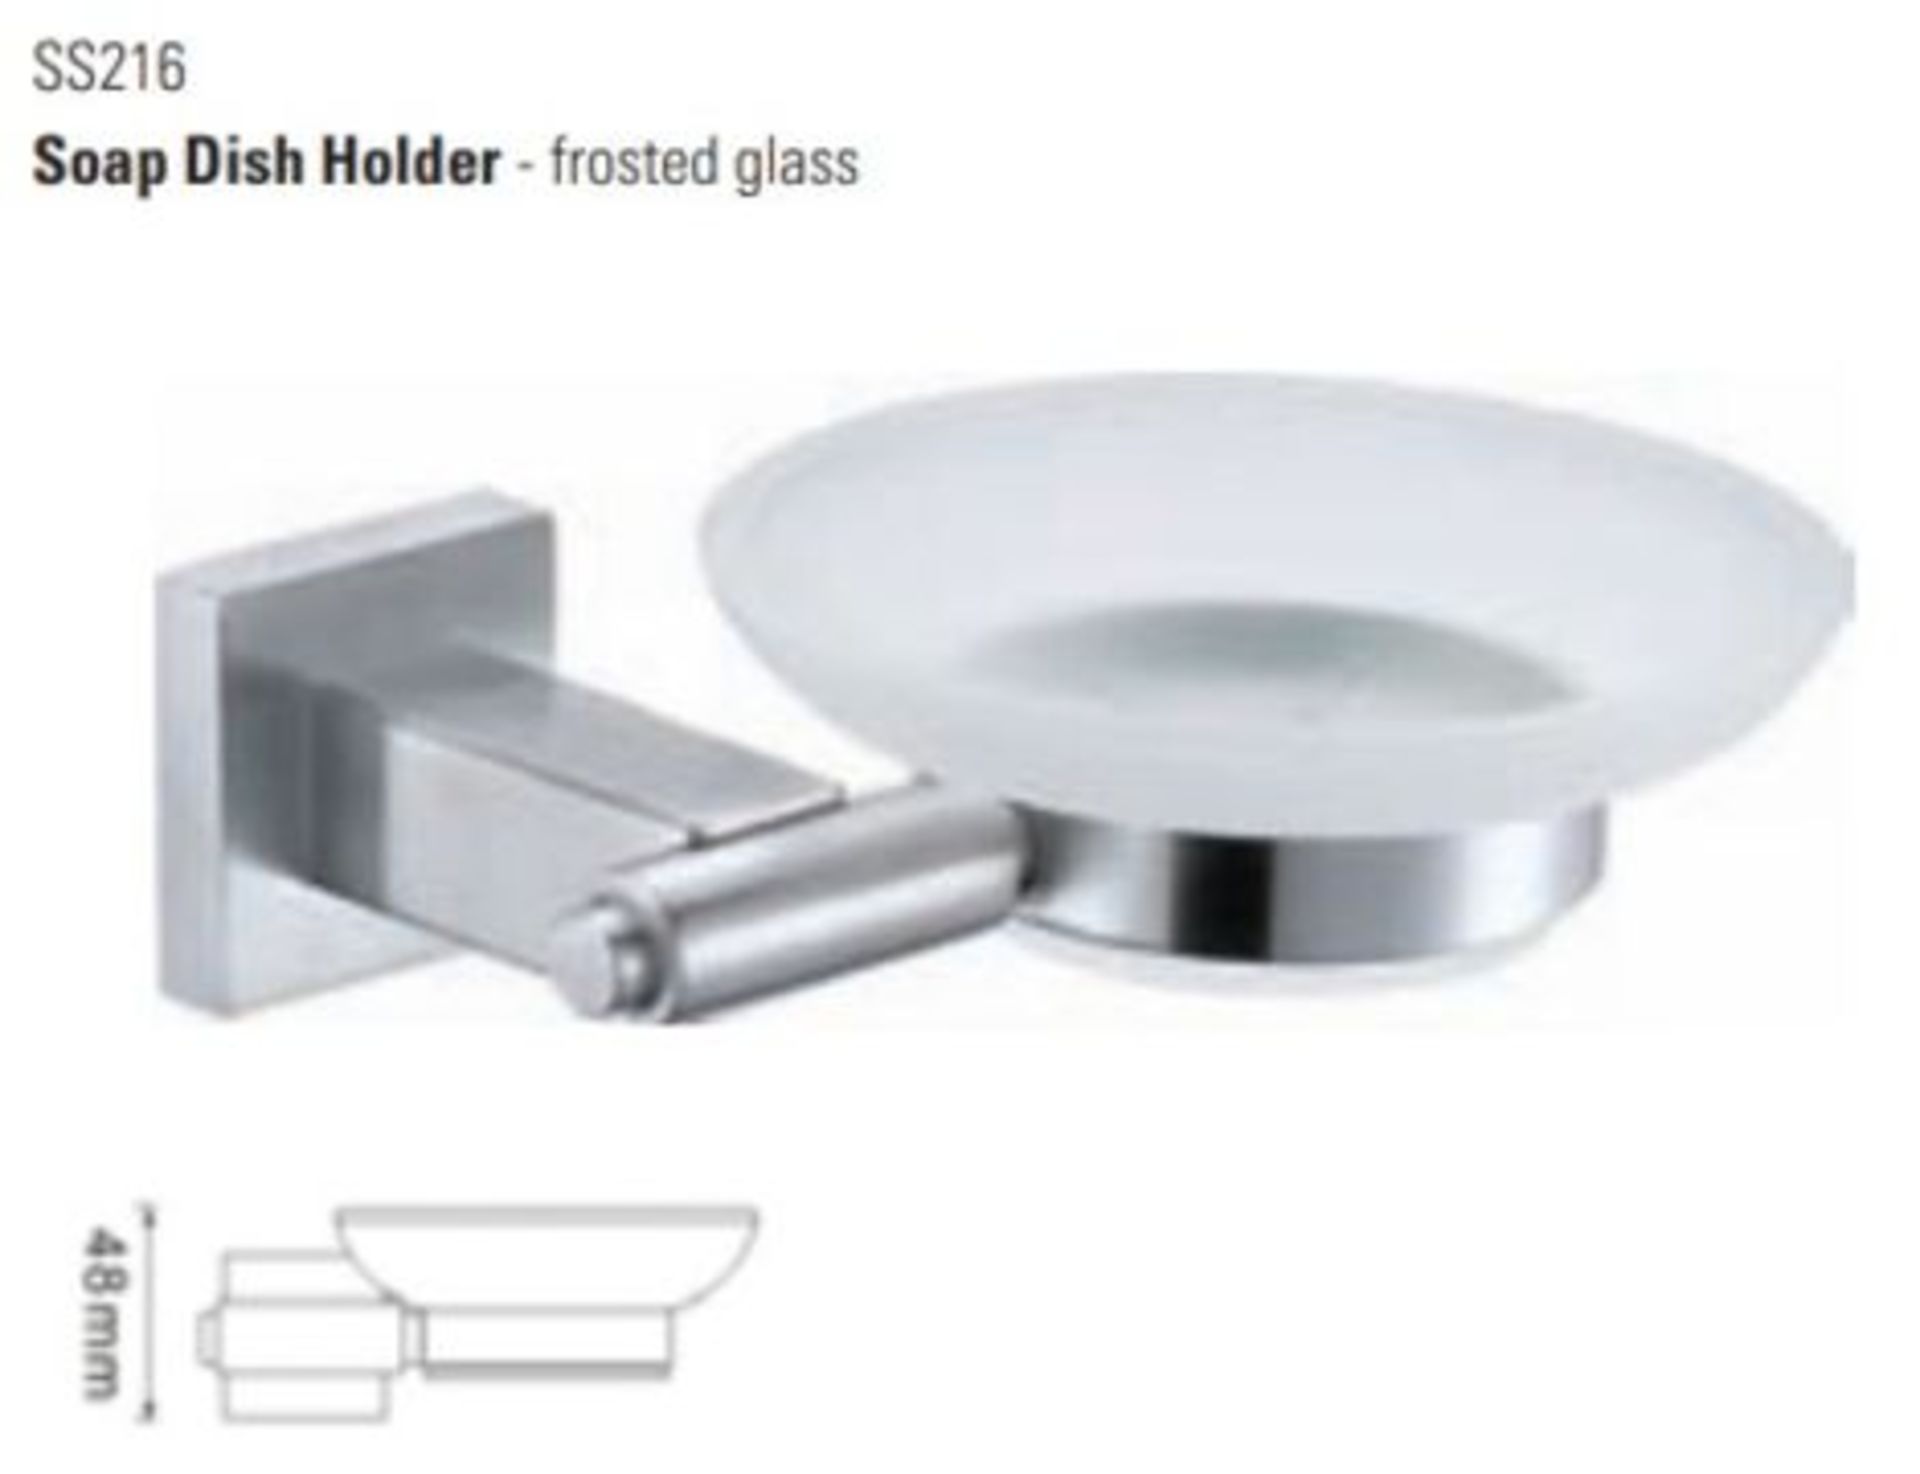 1 x Stonearth Soap Dish Holder With Frosted Glass - Solid Stainless Steel Bathroom Accessory - Brand - Image 2 of 2